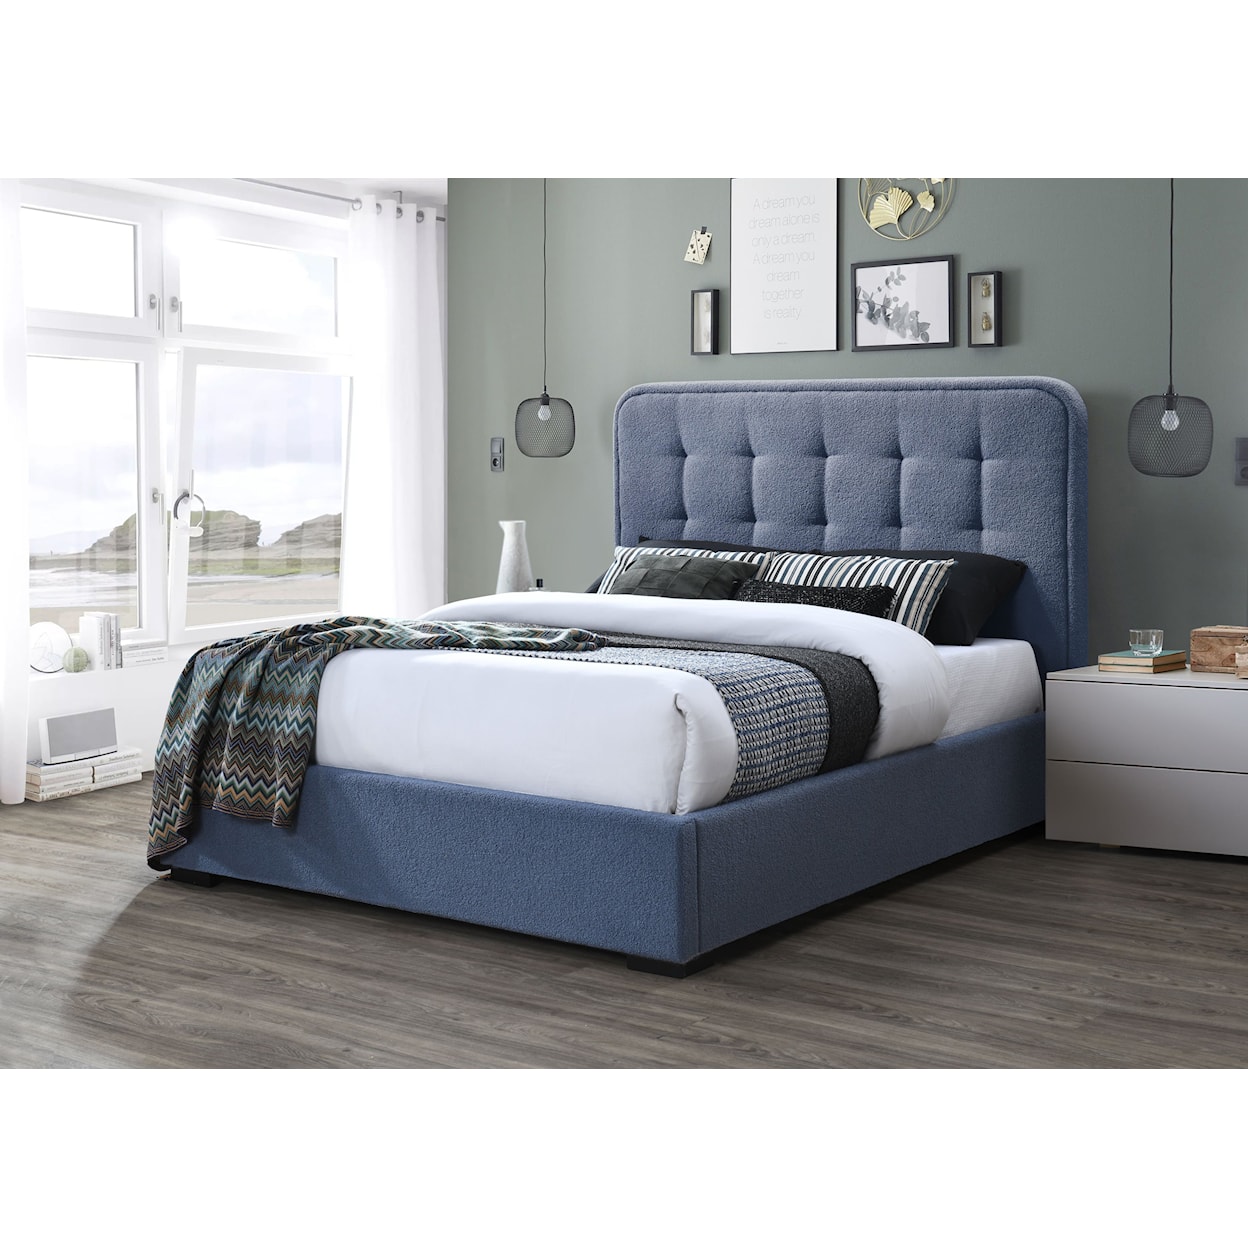 Lifestyle C9434A King Ocean Upholstered Bed